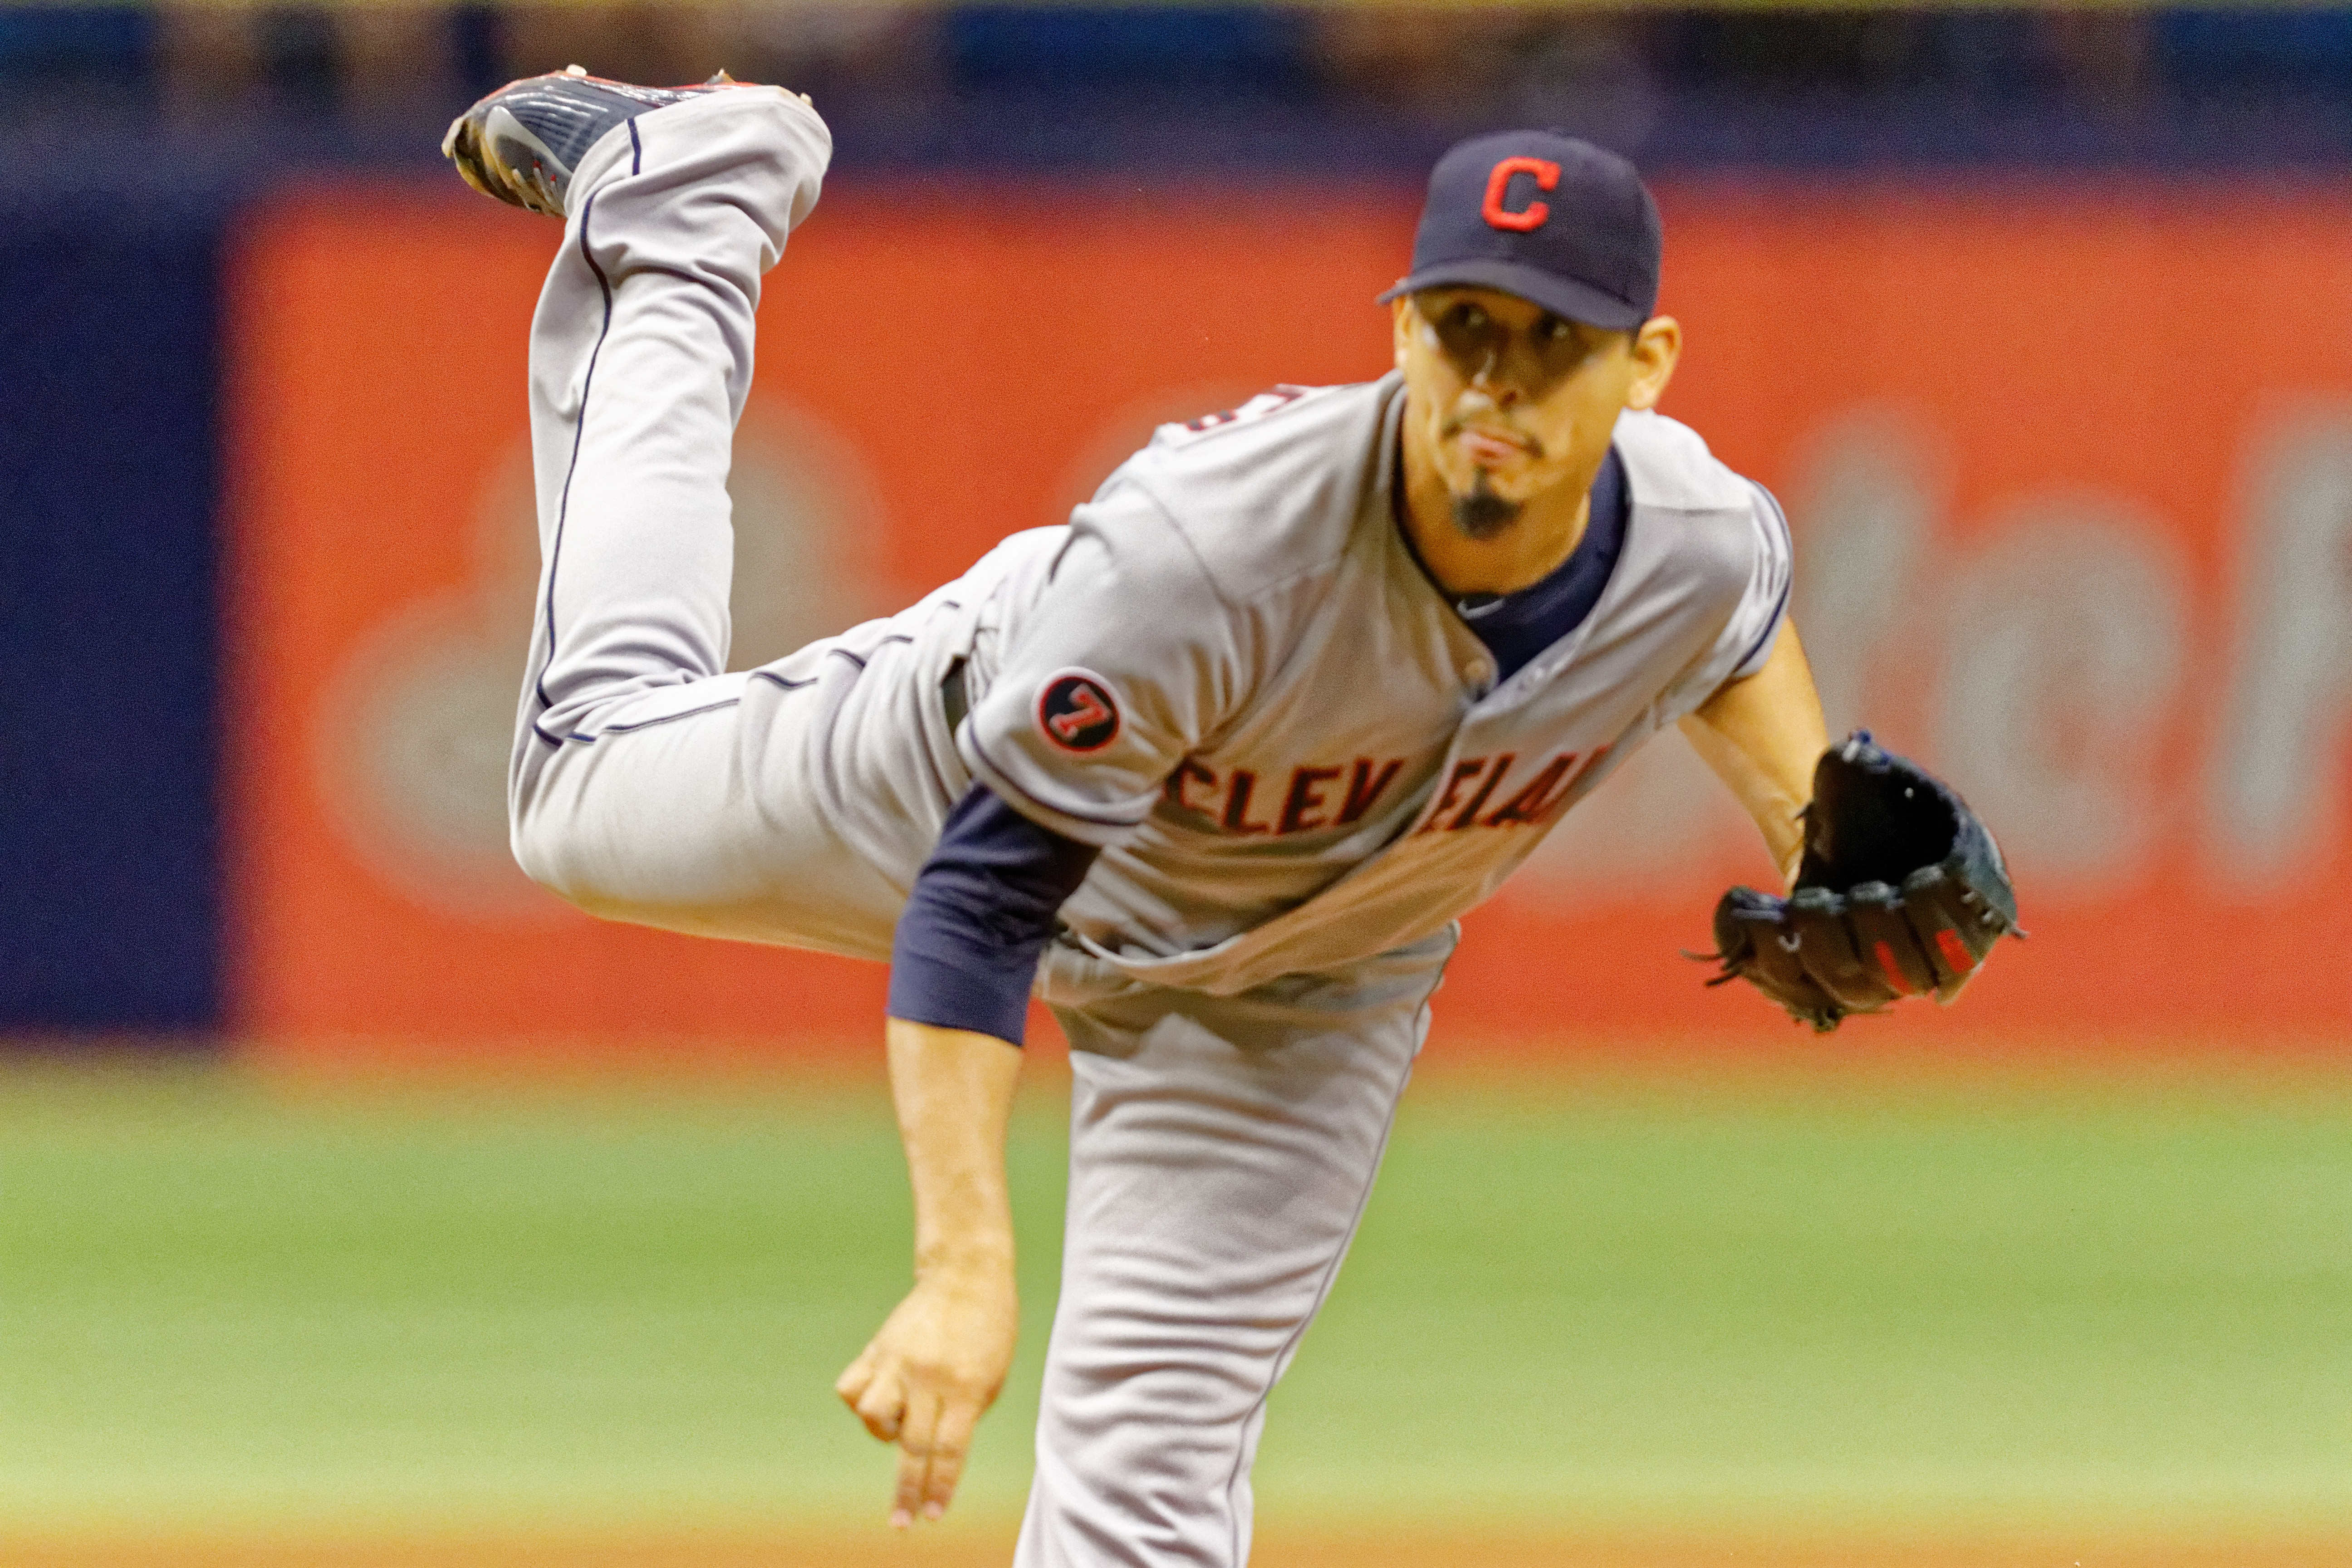 The Indians' Carlos Carrasco came within a strike of a no-hitter./JEFFREY S. KING